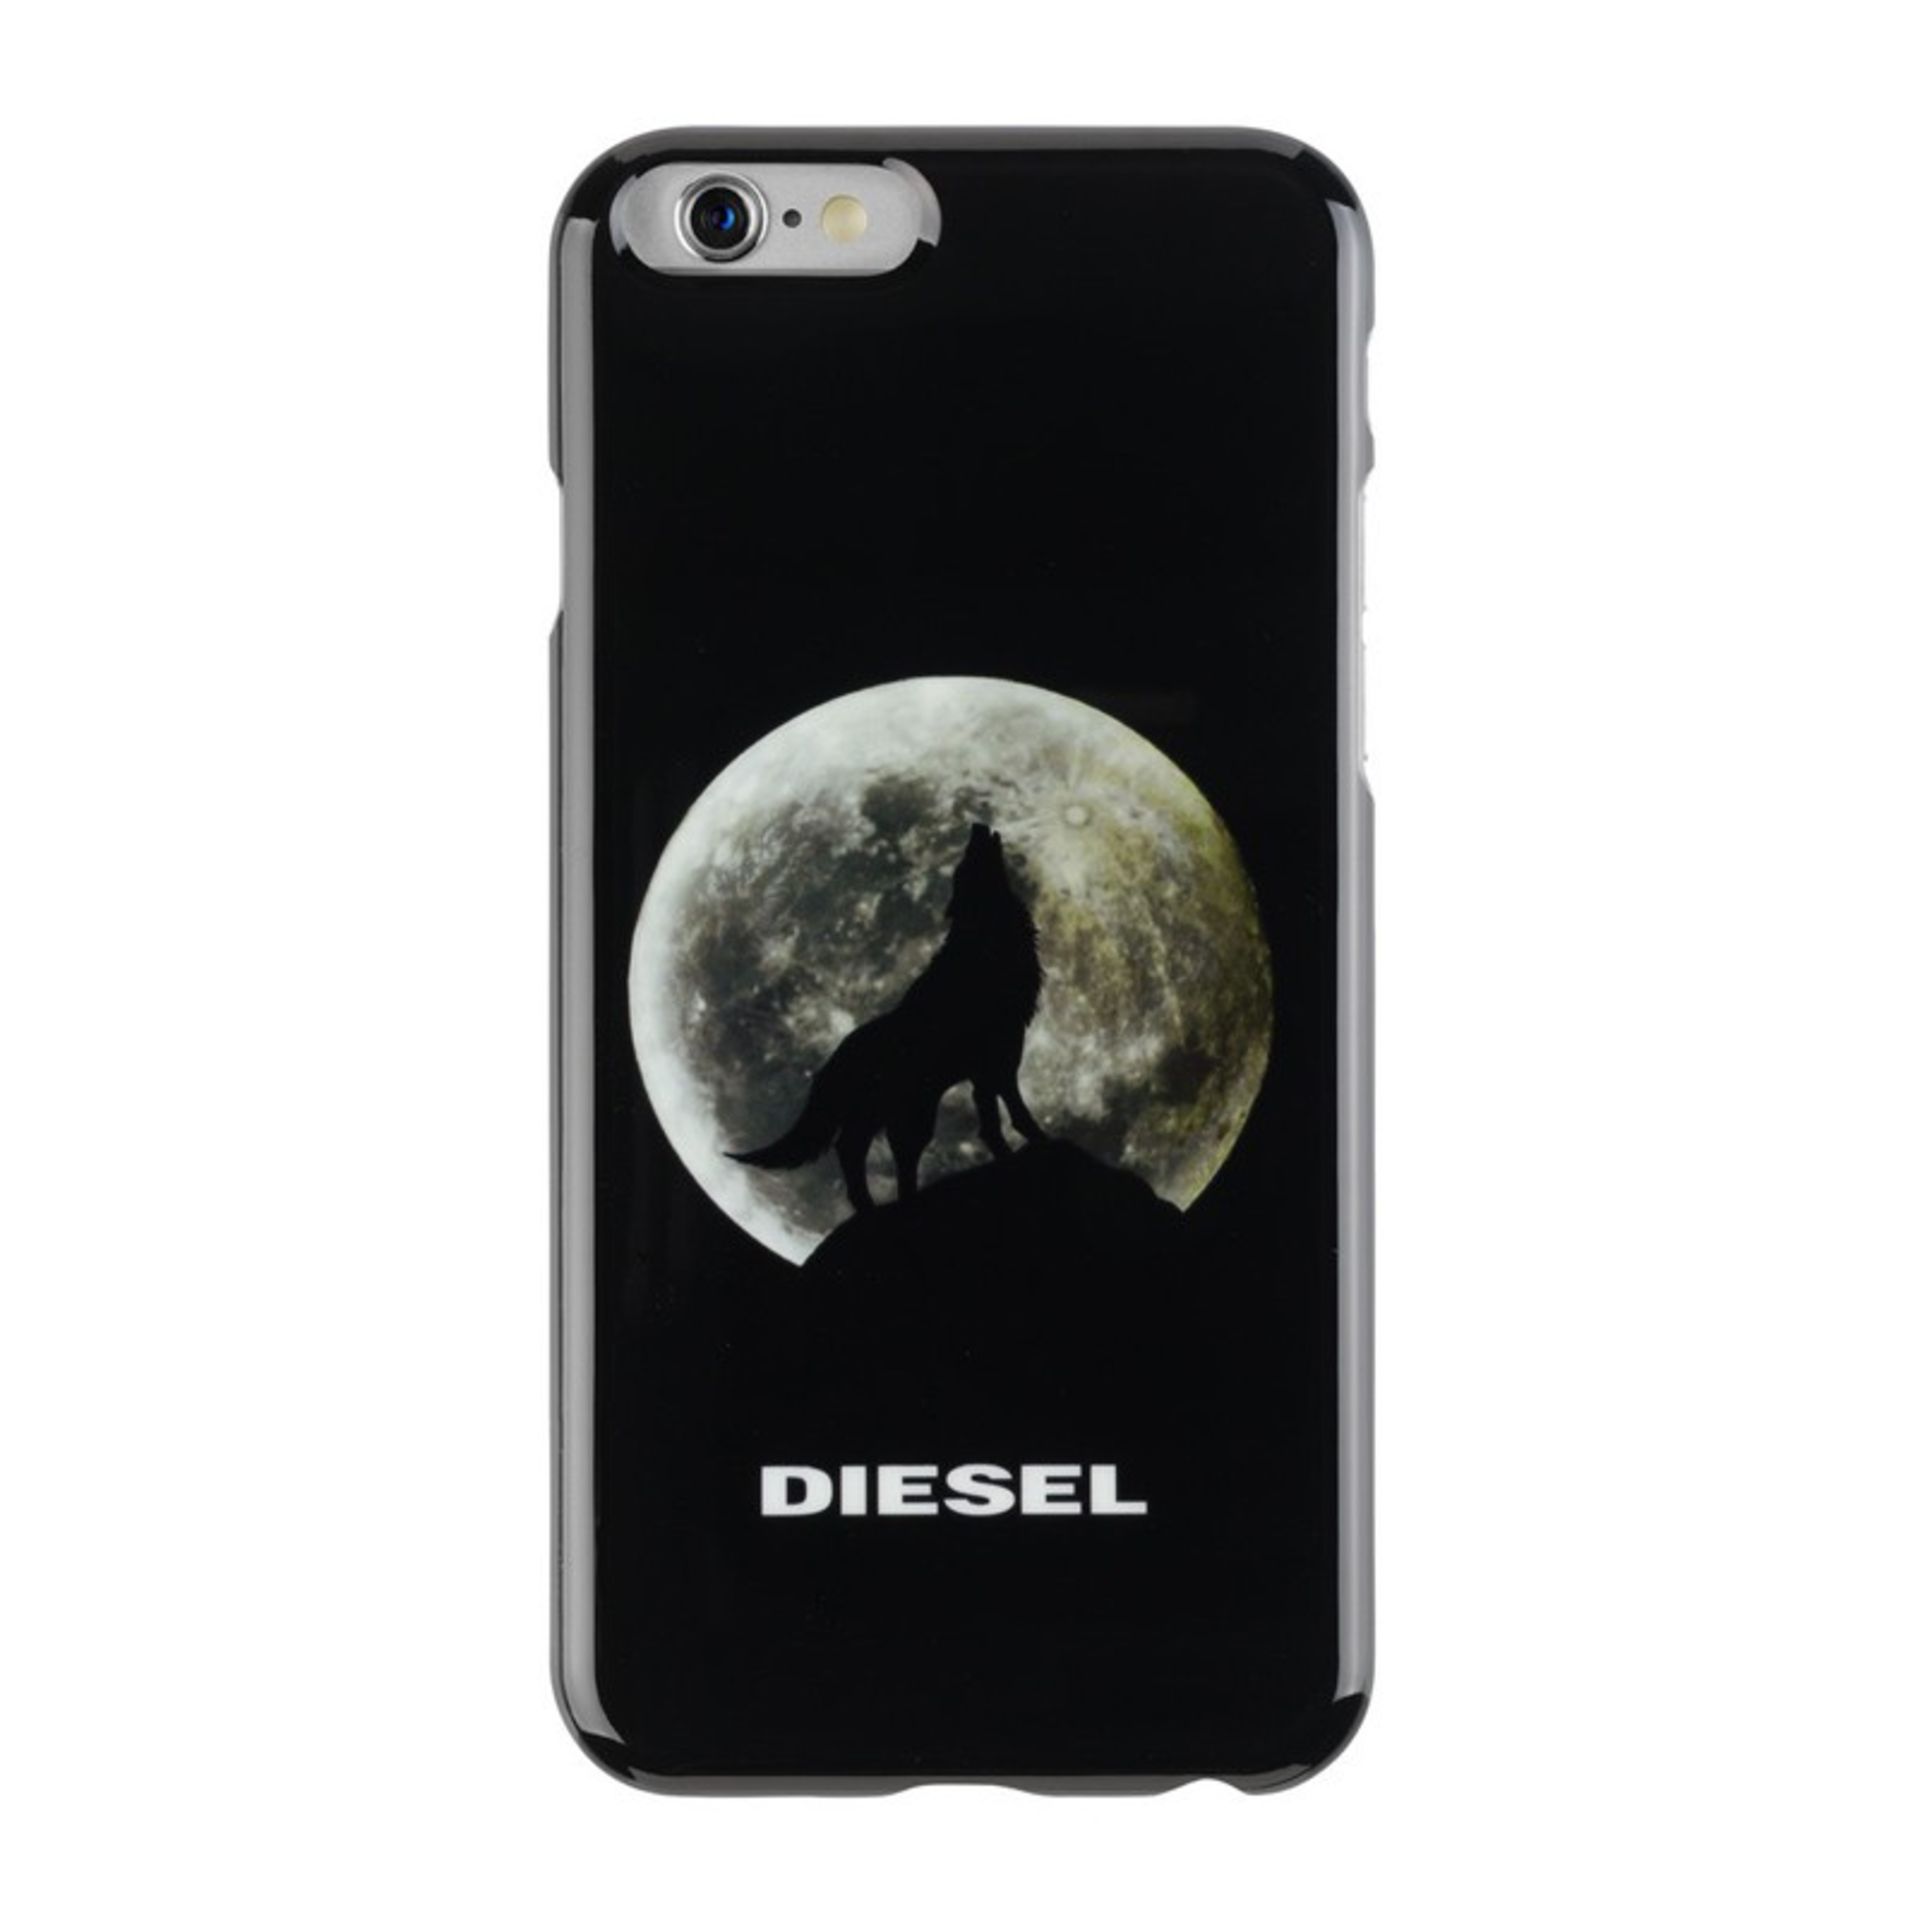 V Brand New 2x Diesel Pluton 6 Hard Snap Case For iPhone 6 ISP Price 19.90 Euros